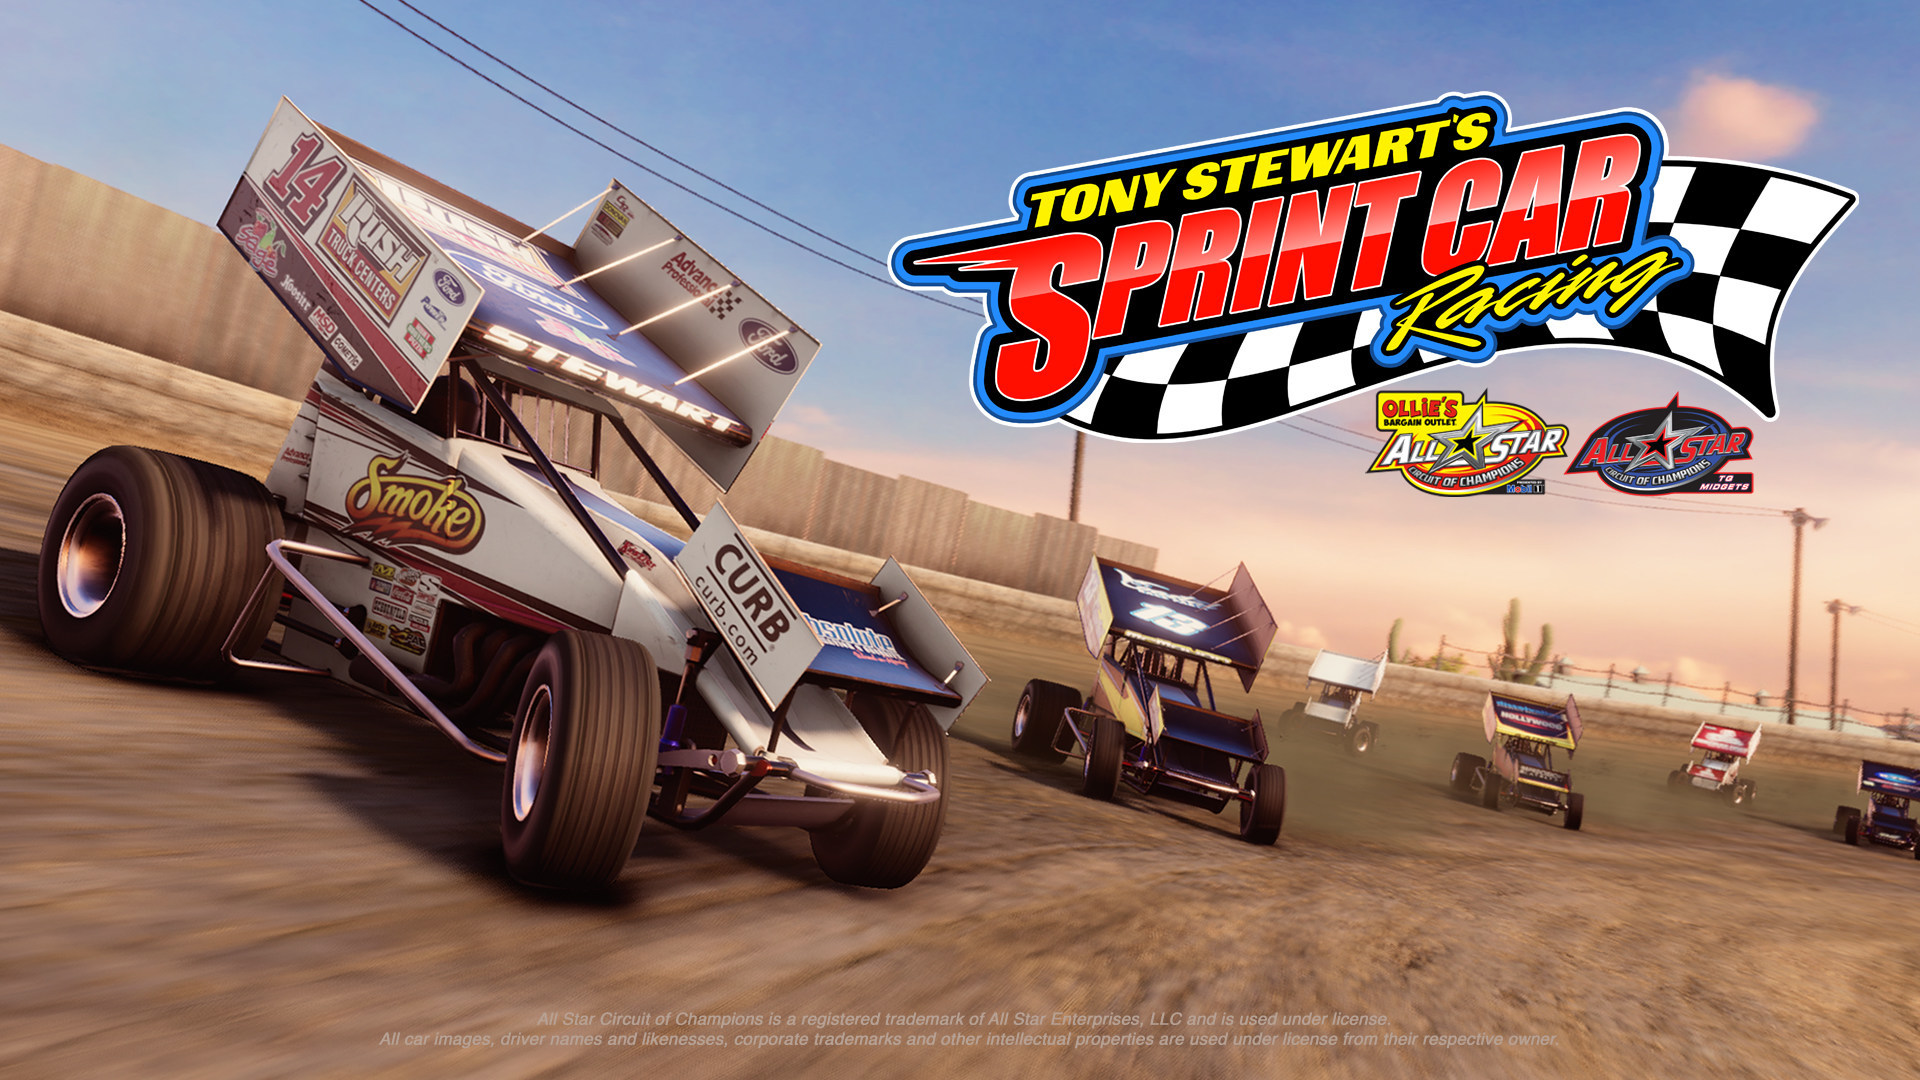 Tony Stewart Teams Up With Veteran Game Developer To Create His First Sprint Car Game